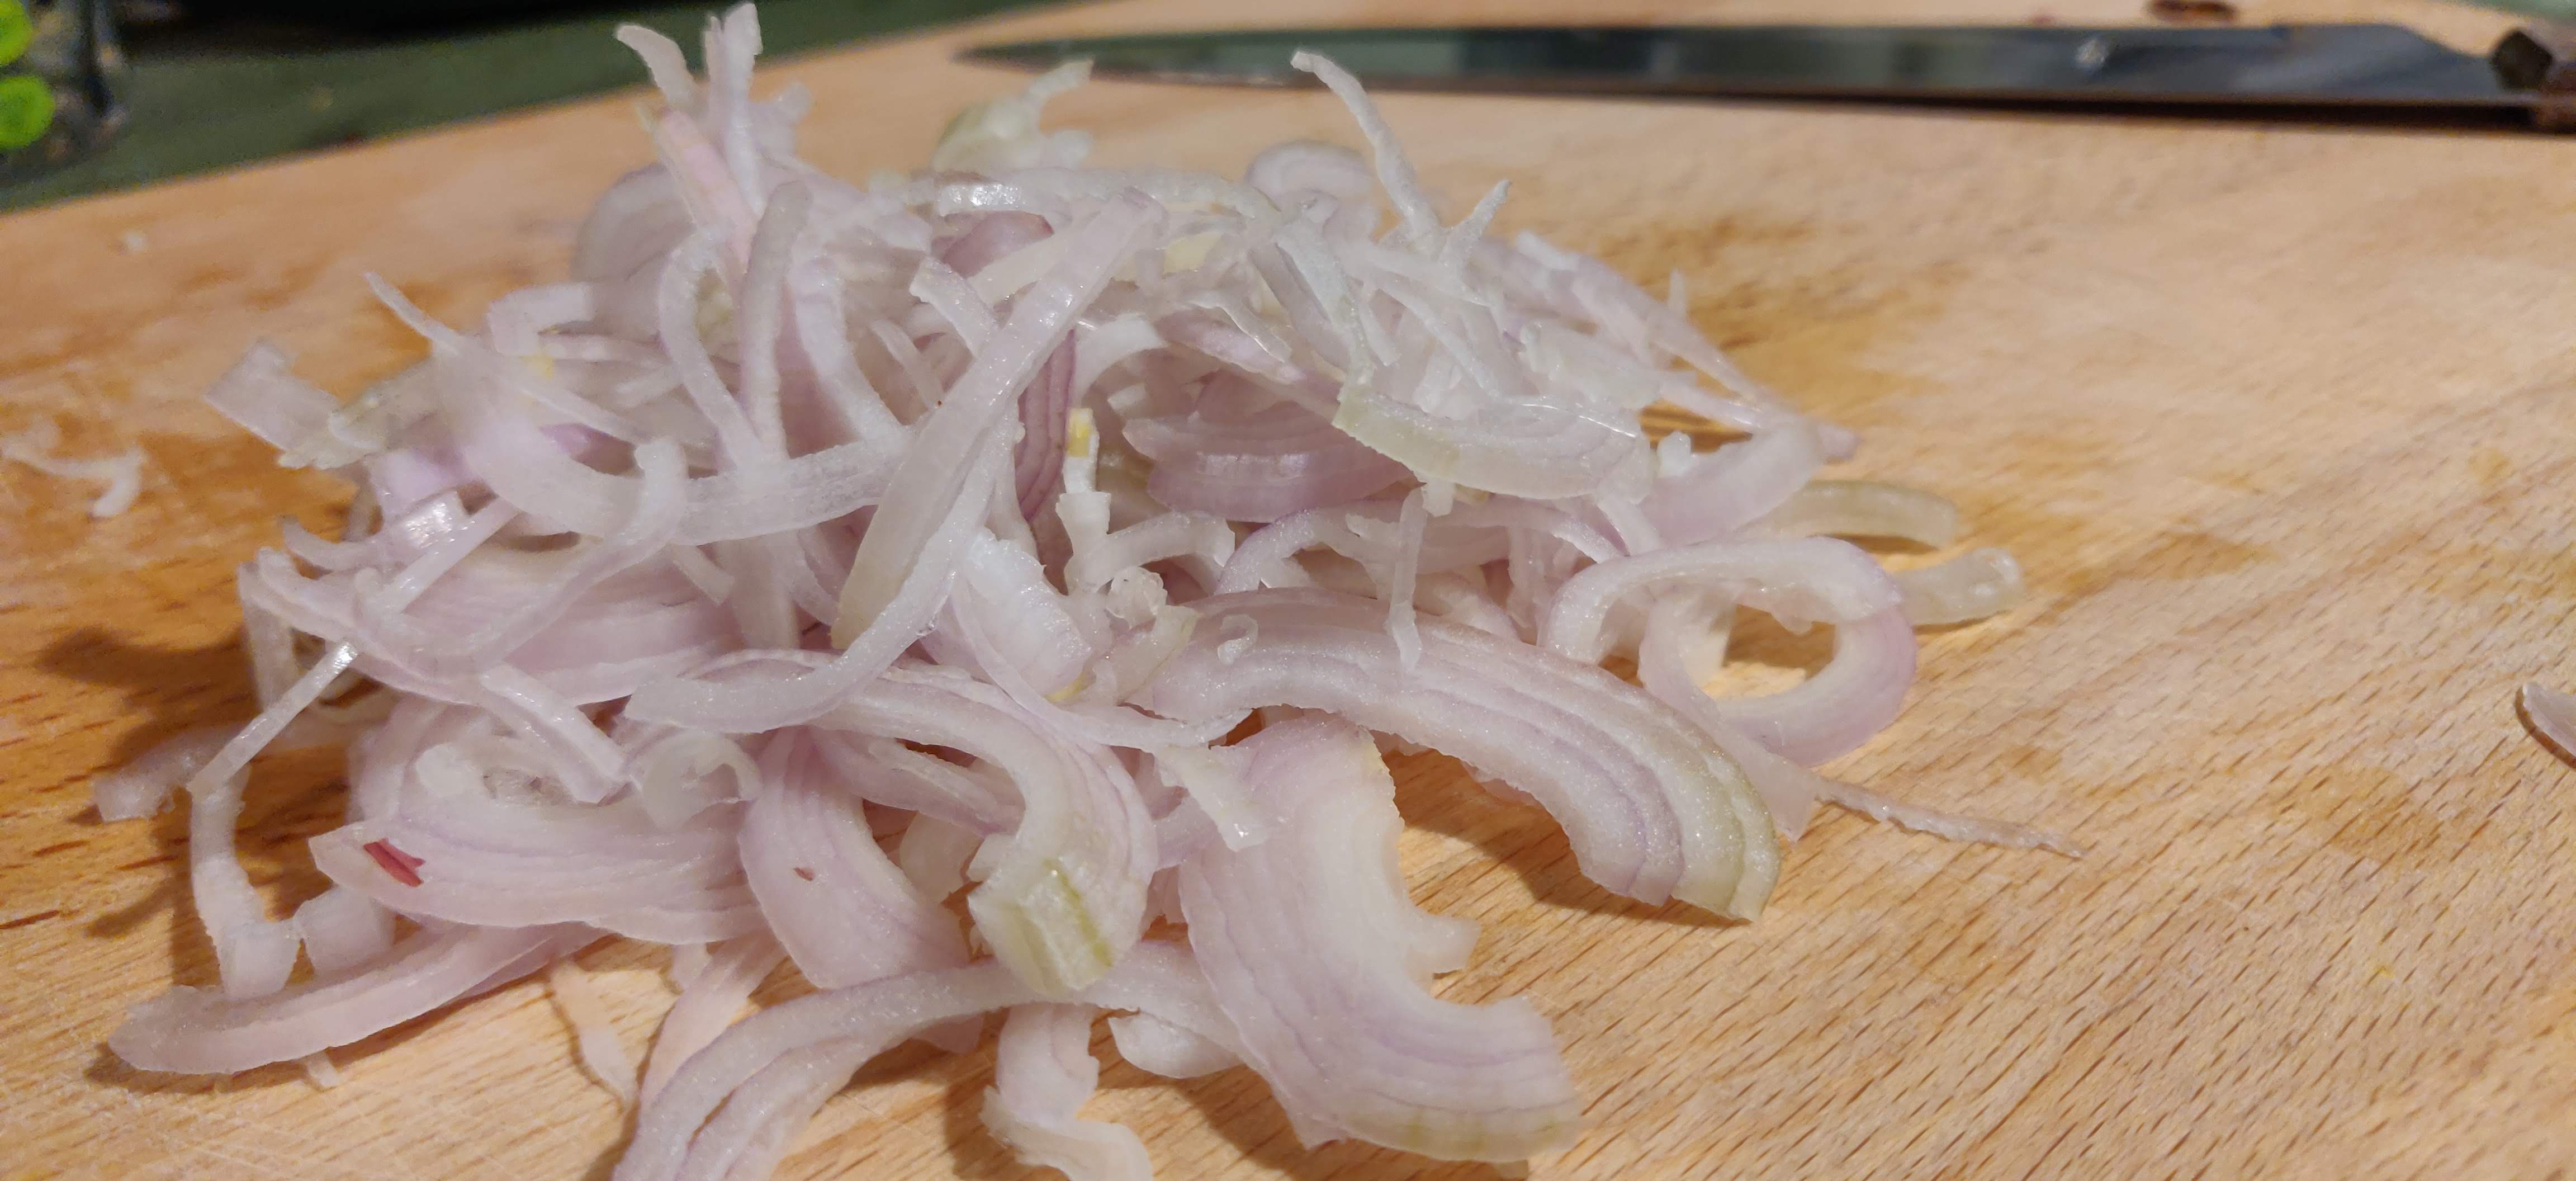 I love the subtle purple in shallots